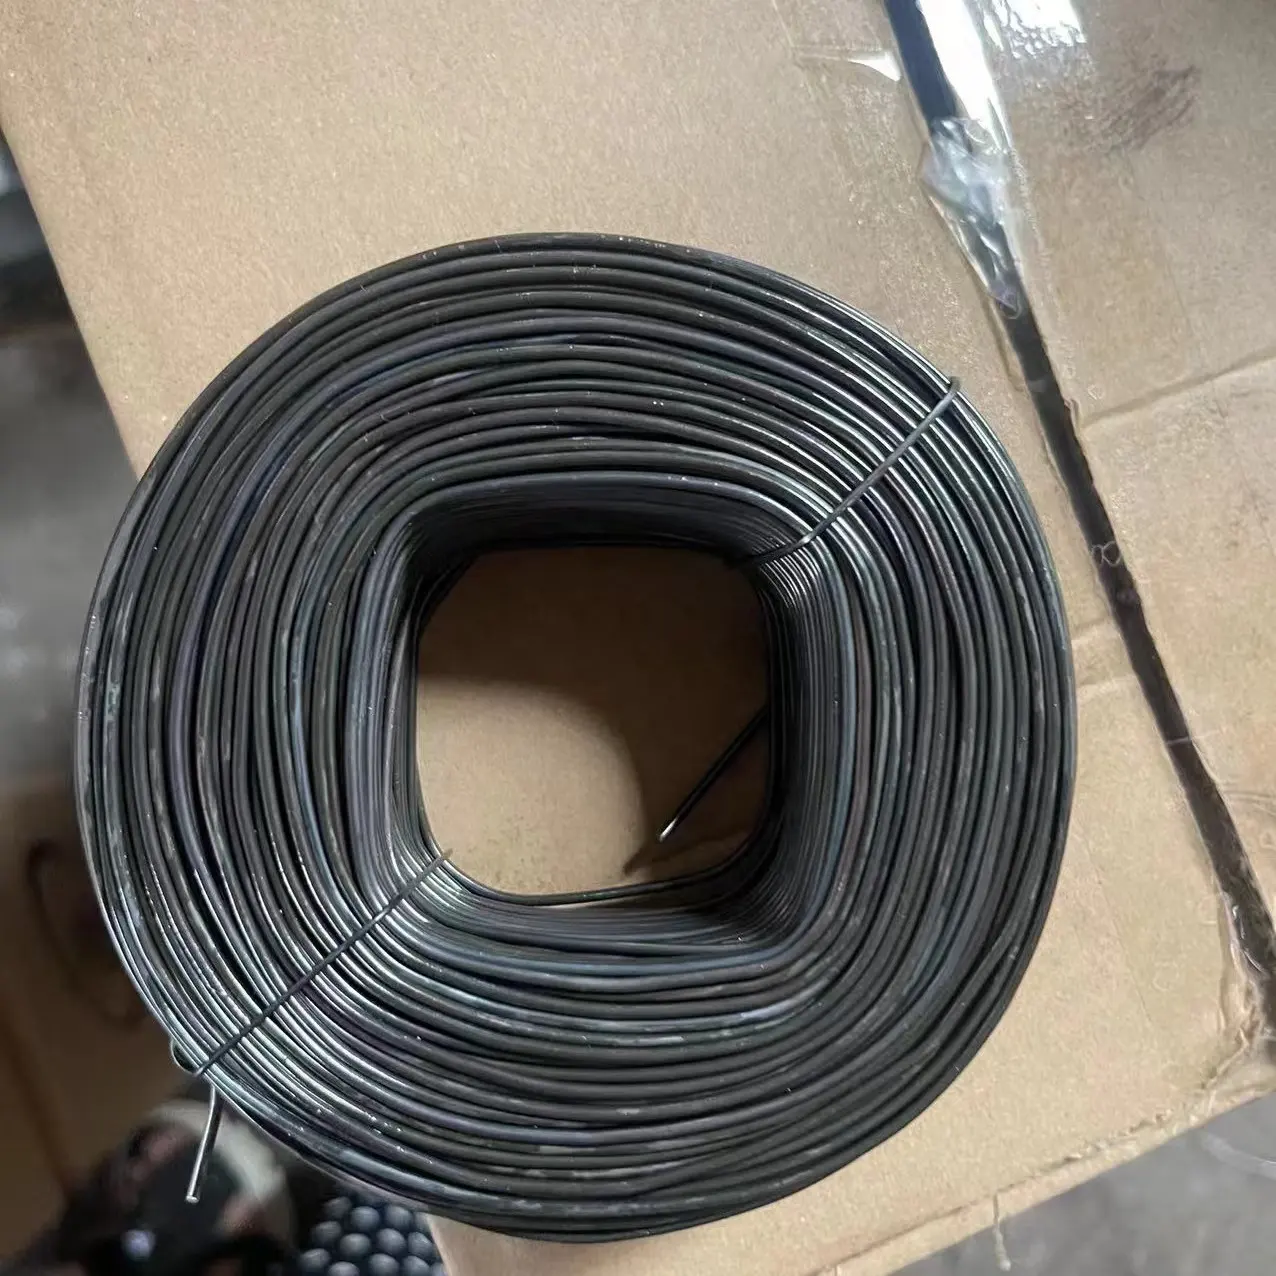 Hot sale Building Binding wire black iron wire 1.2mm 18# 1kg per roll Black annealed wire